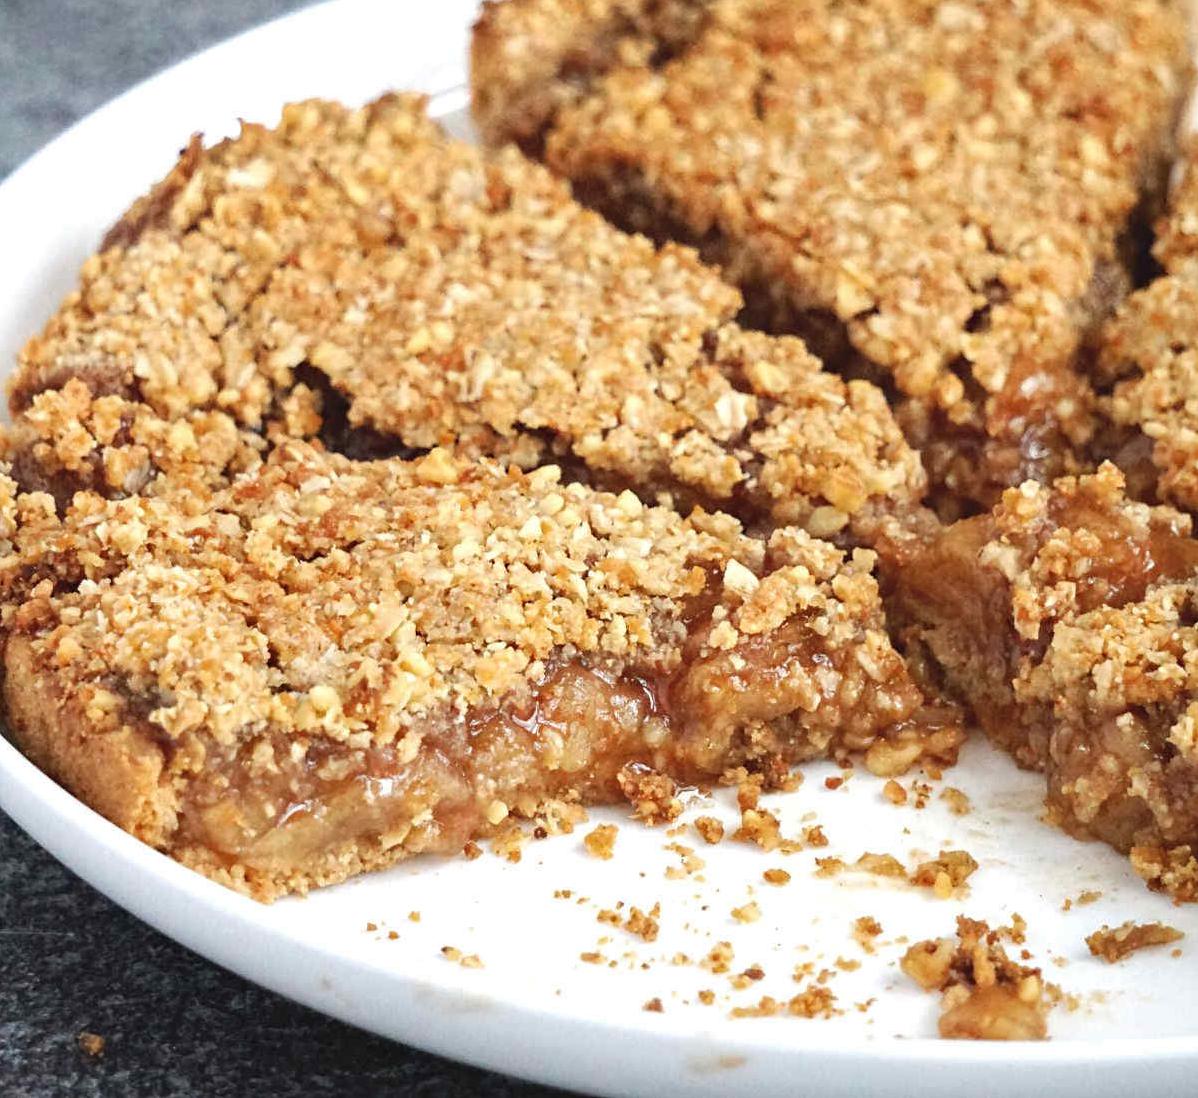  This crumb topping is perfect for those with gluten sensitivities